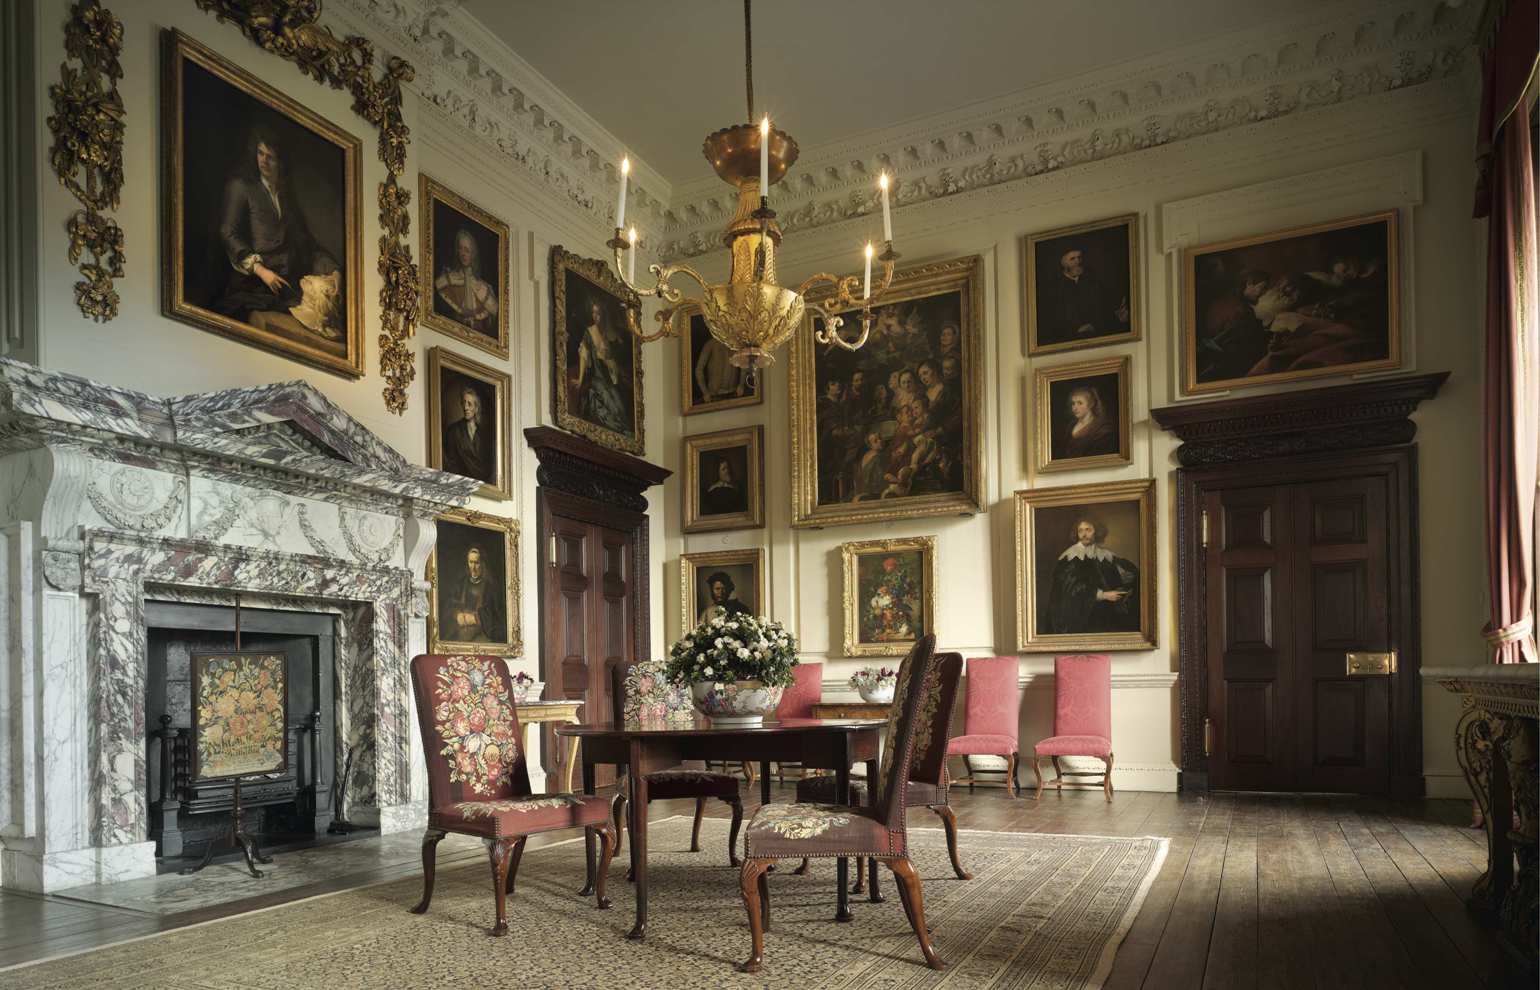 Houghton Hall's Common Parlour